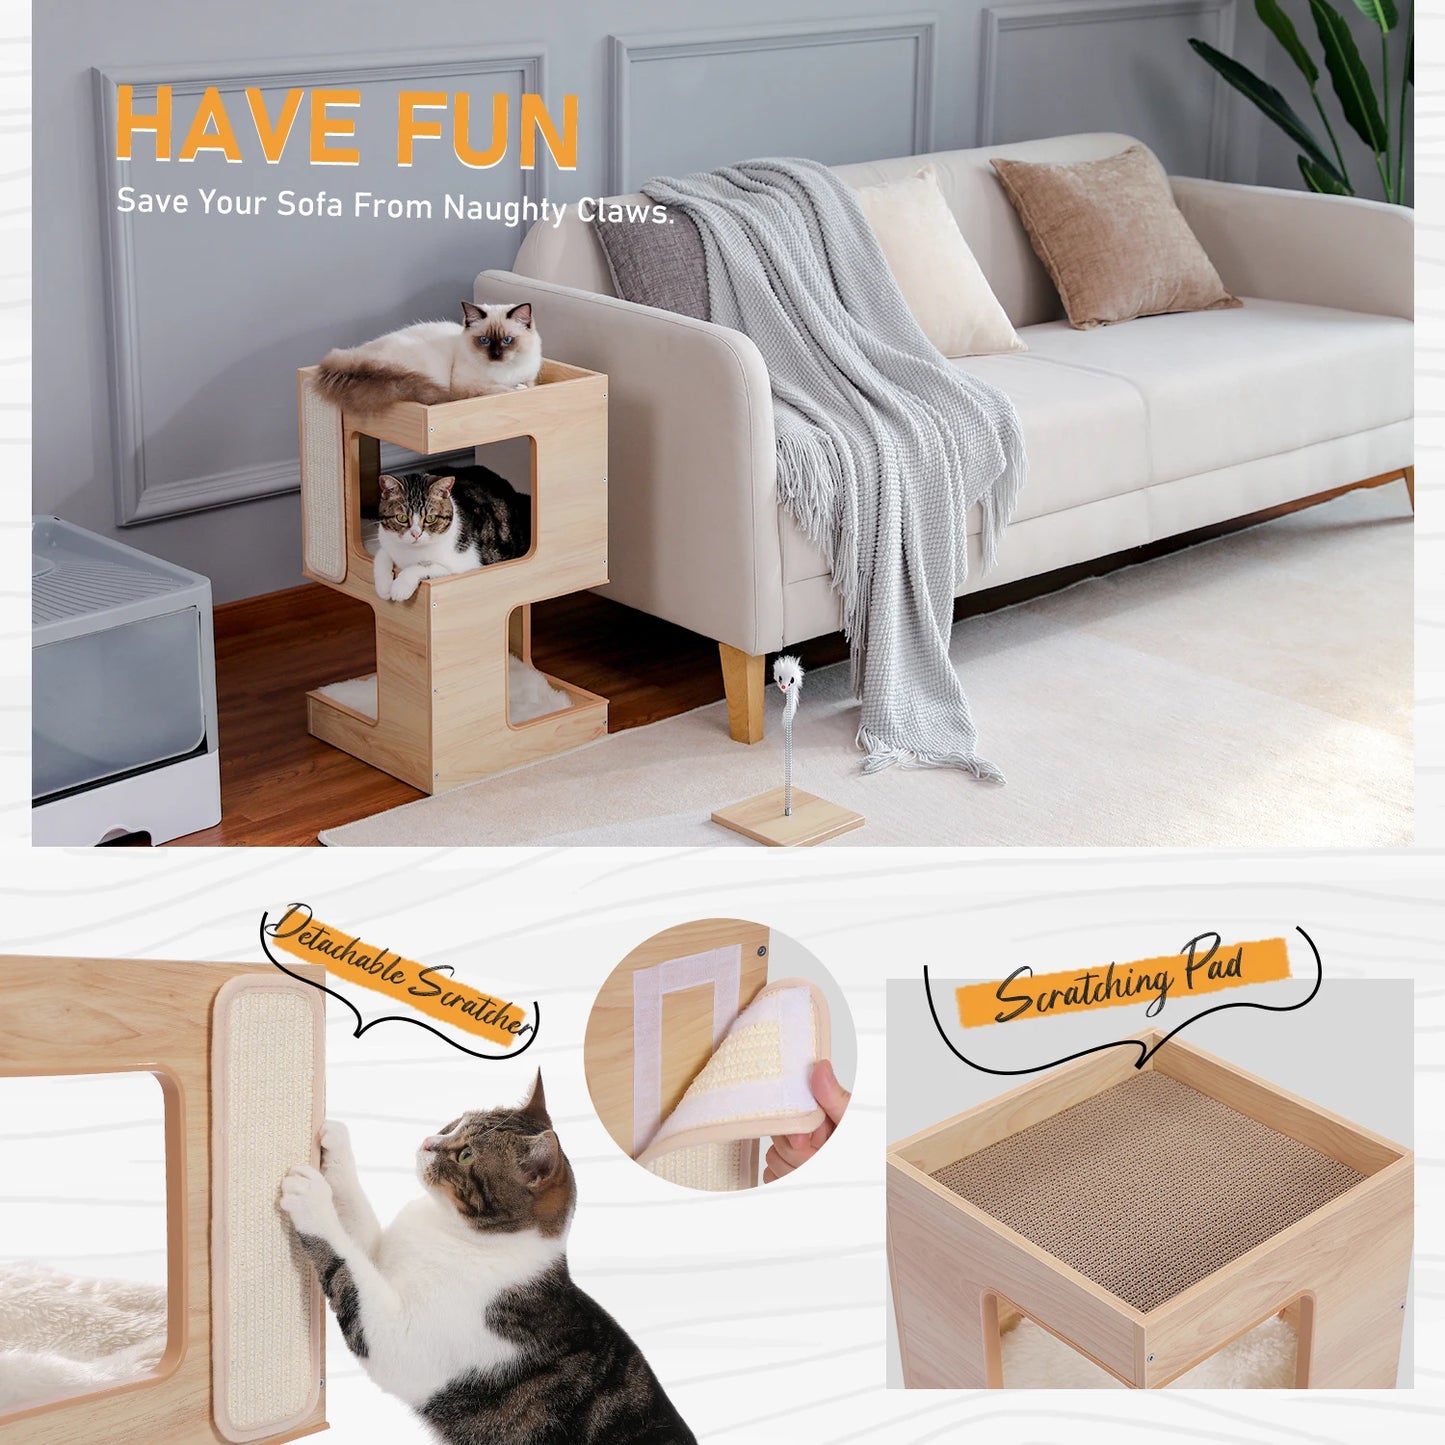 60cm Two-Piece Cat Bed Set with Teaser Toy and Cat House